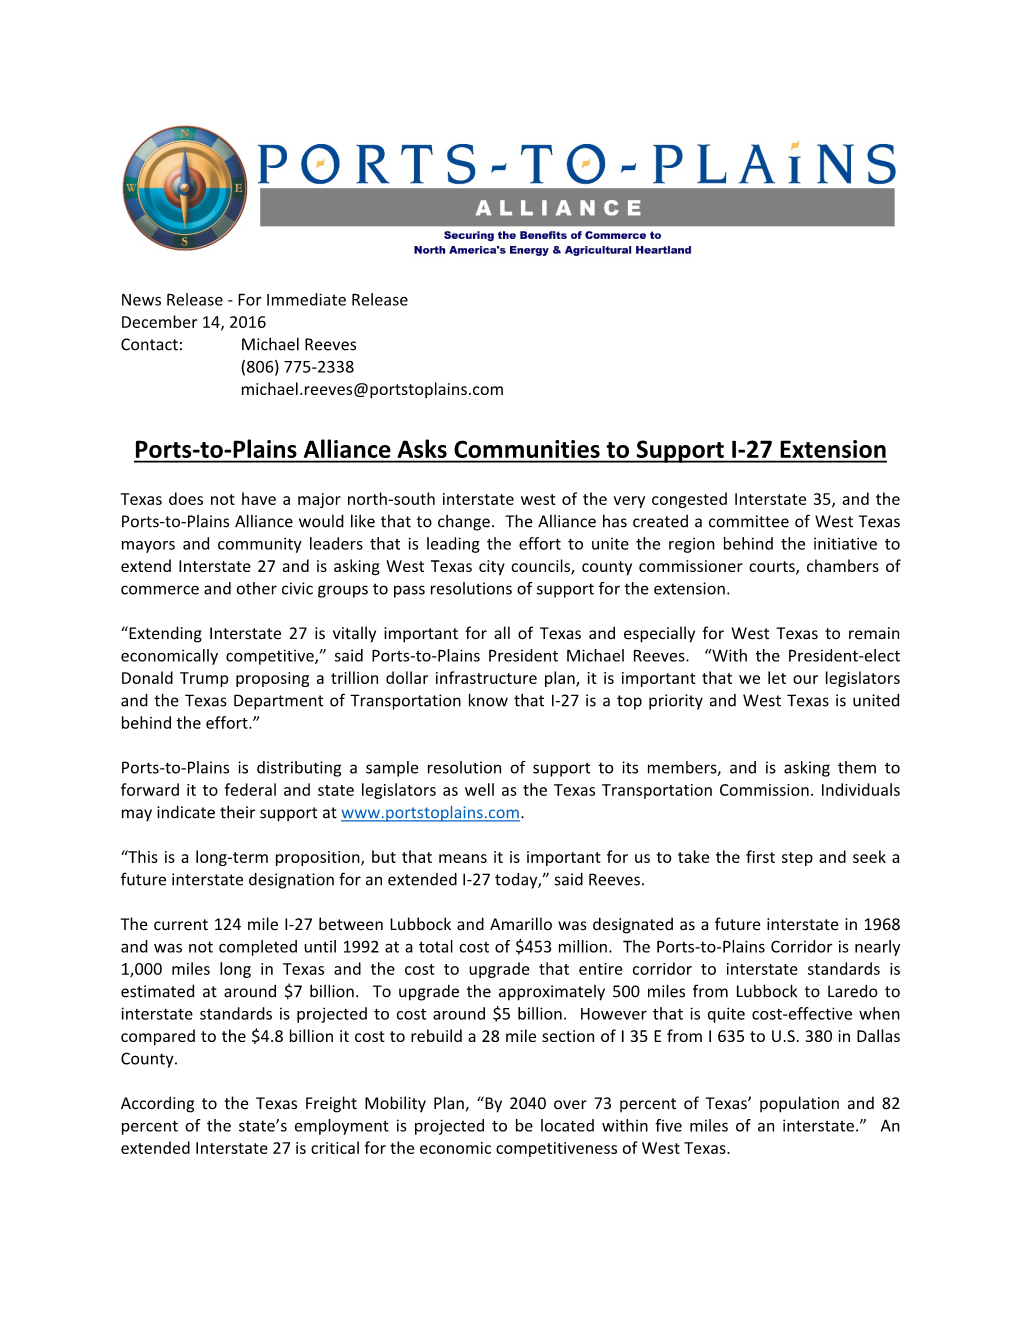 Ports-To-Plains Alliance Asks Communities to Support I-27